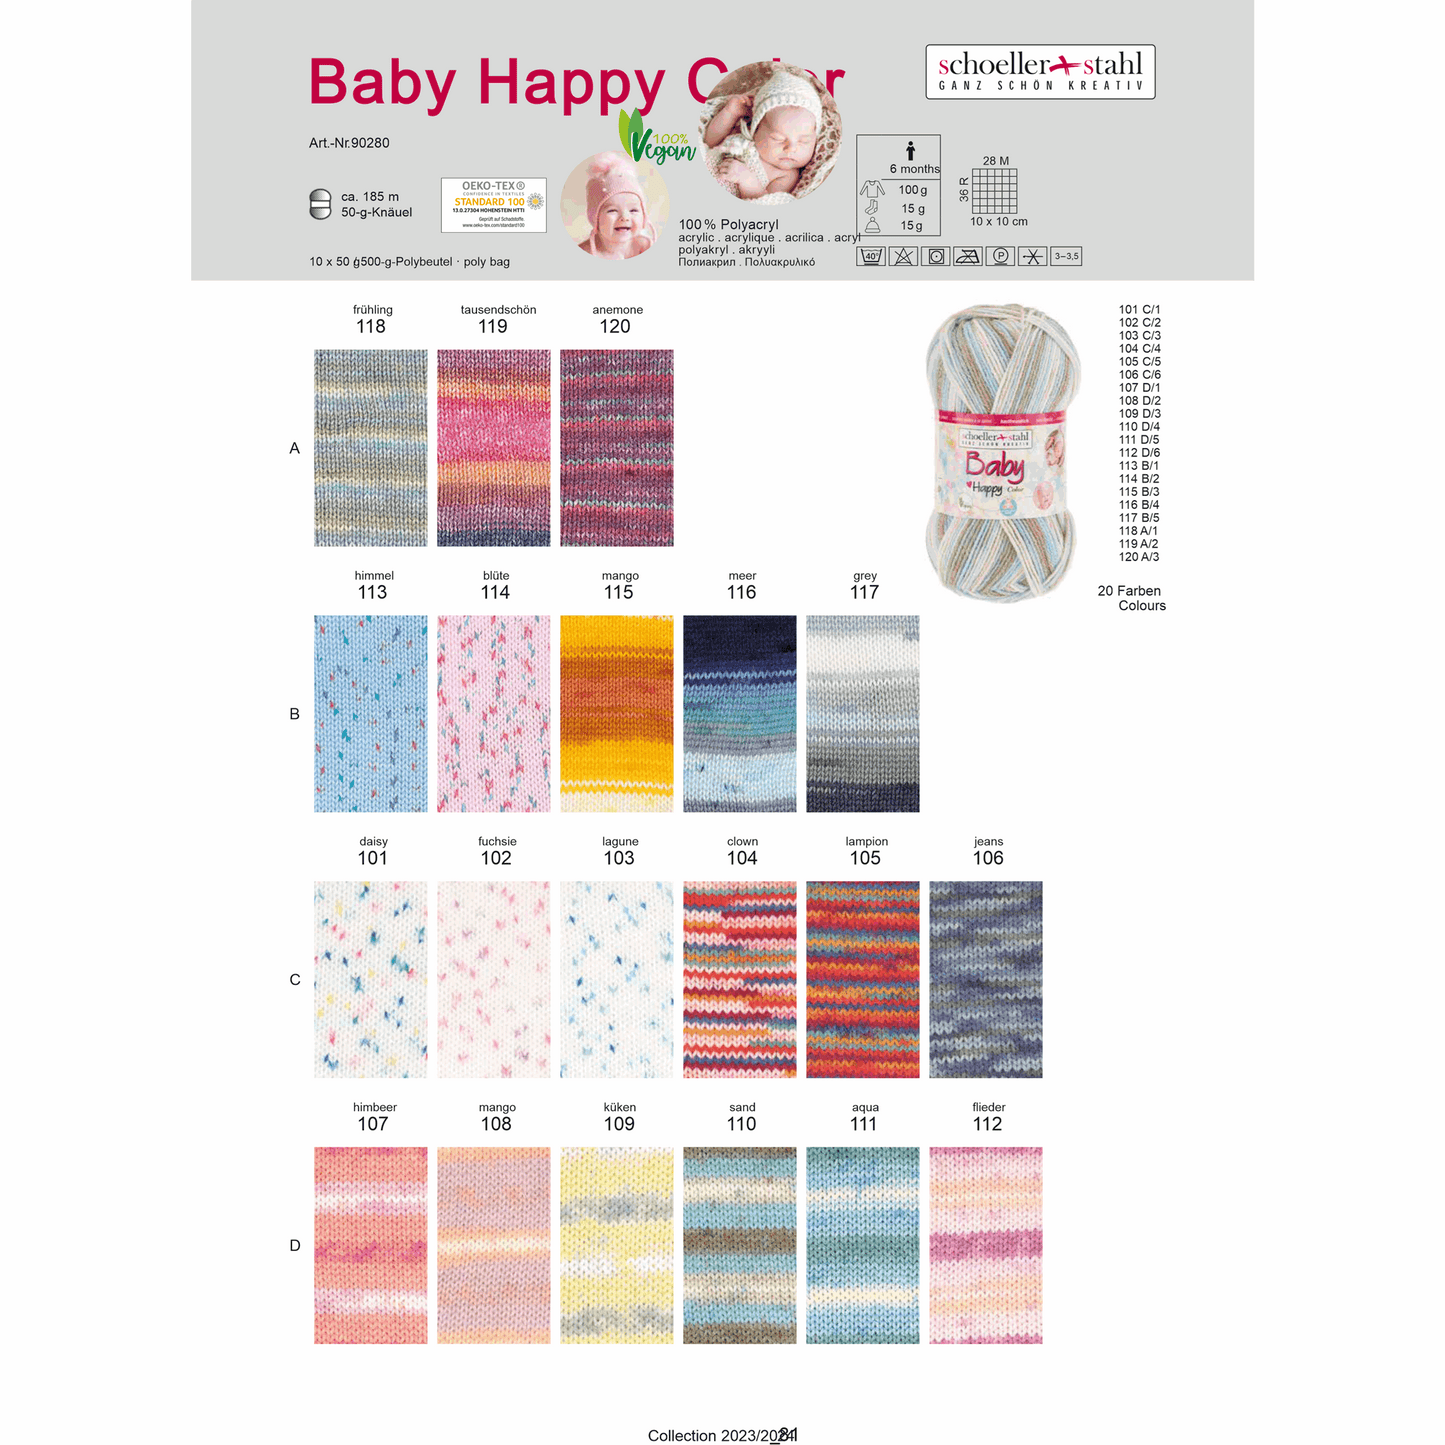 Baby happy color 50g, 90280, color 109, chick